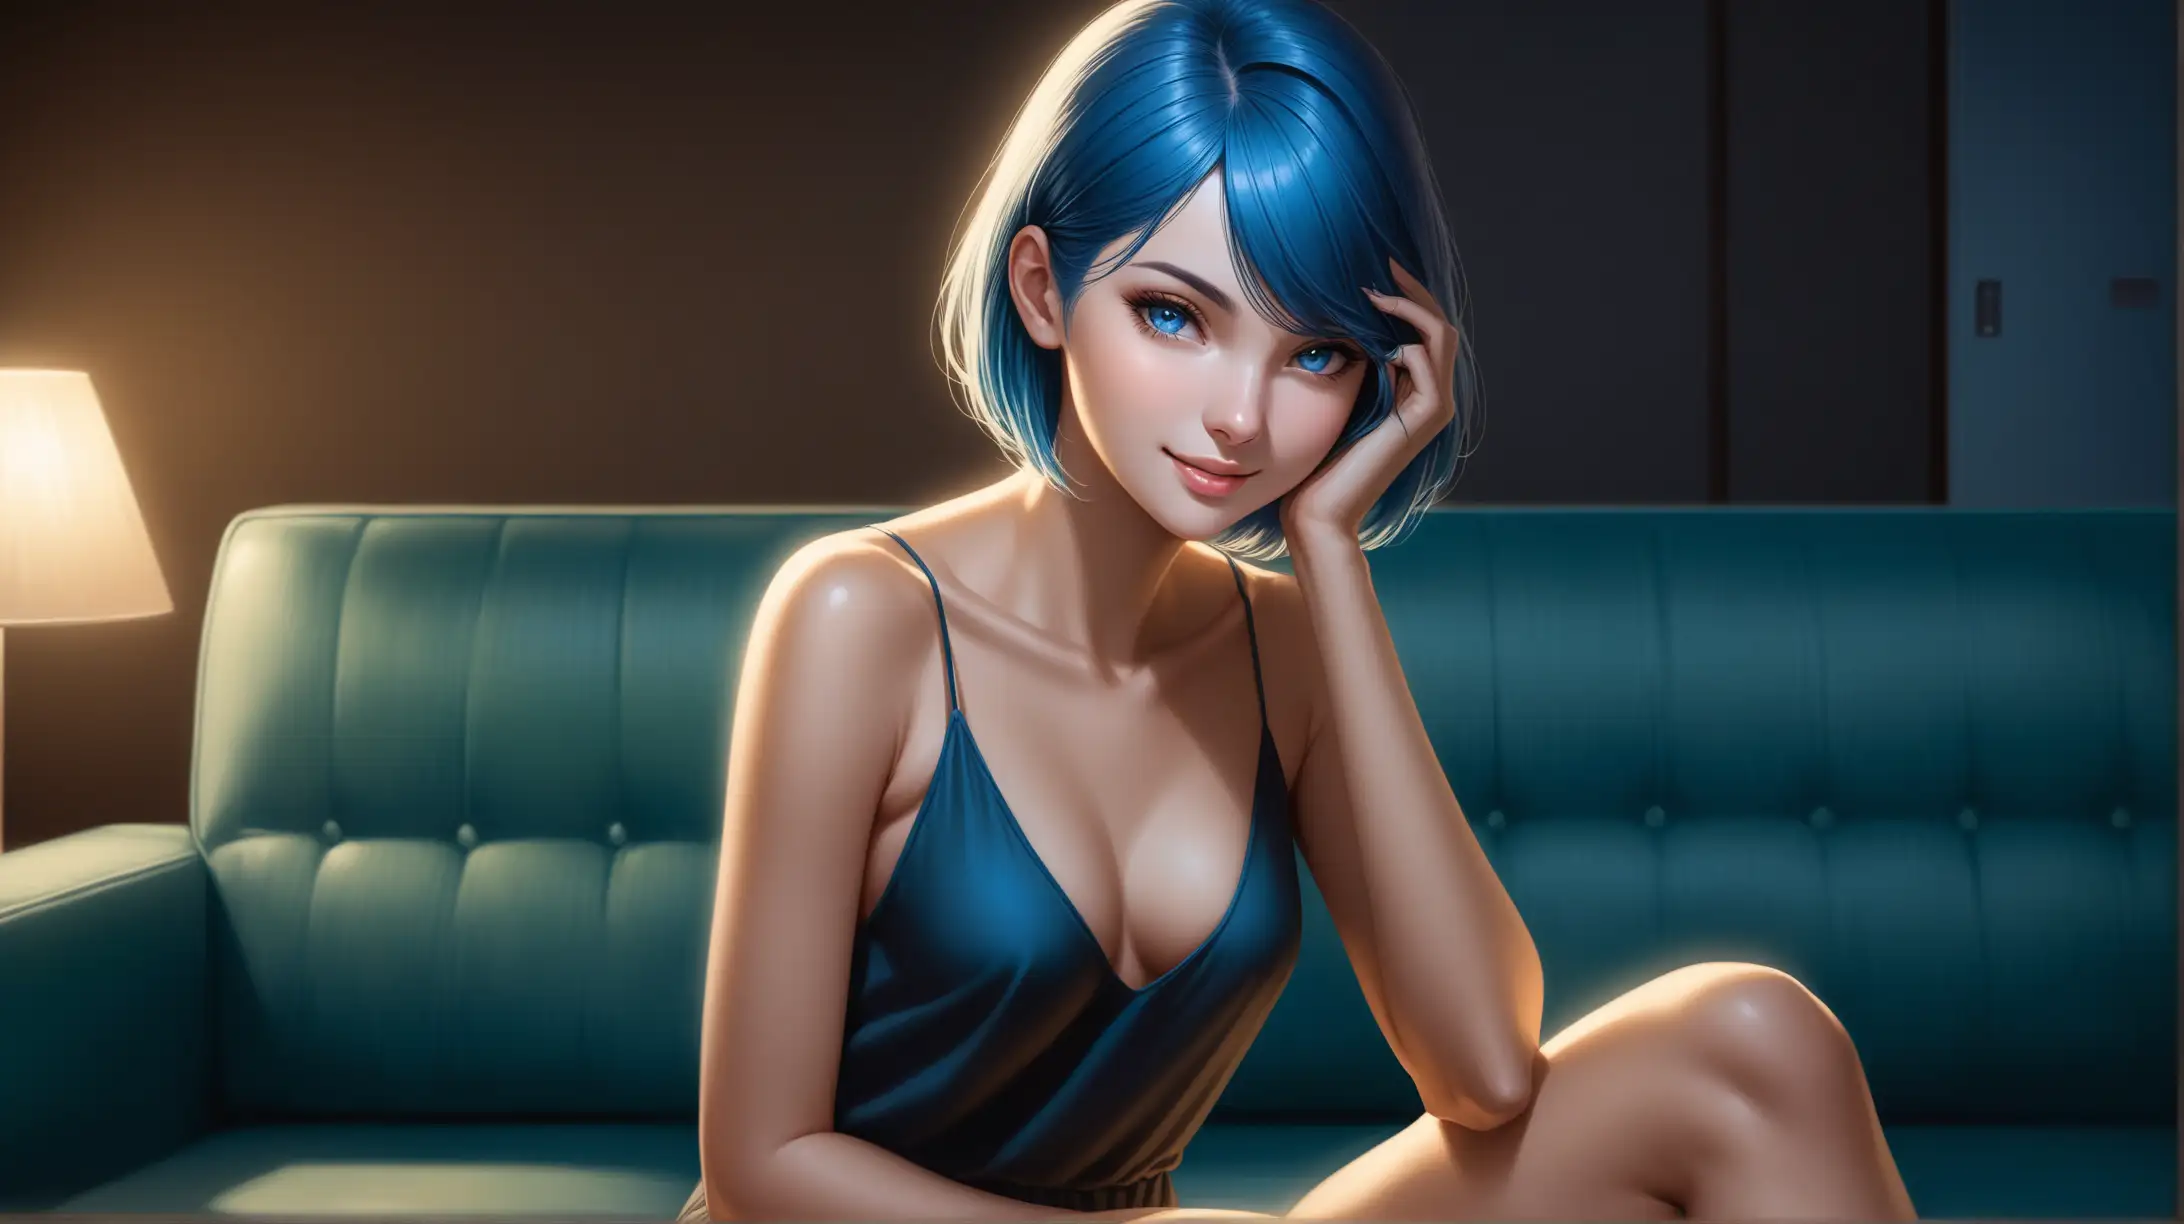 Draw a woman, short blue hair covering one eye, blue eyes, slender figure, high quality, realistic, accurate, detailed, long shot, night lighting, indoors, sofa, sitting, relaxed outfit, seductive pose, smiling at the viewer